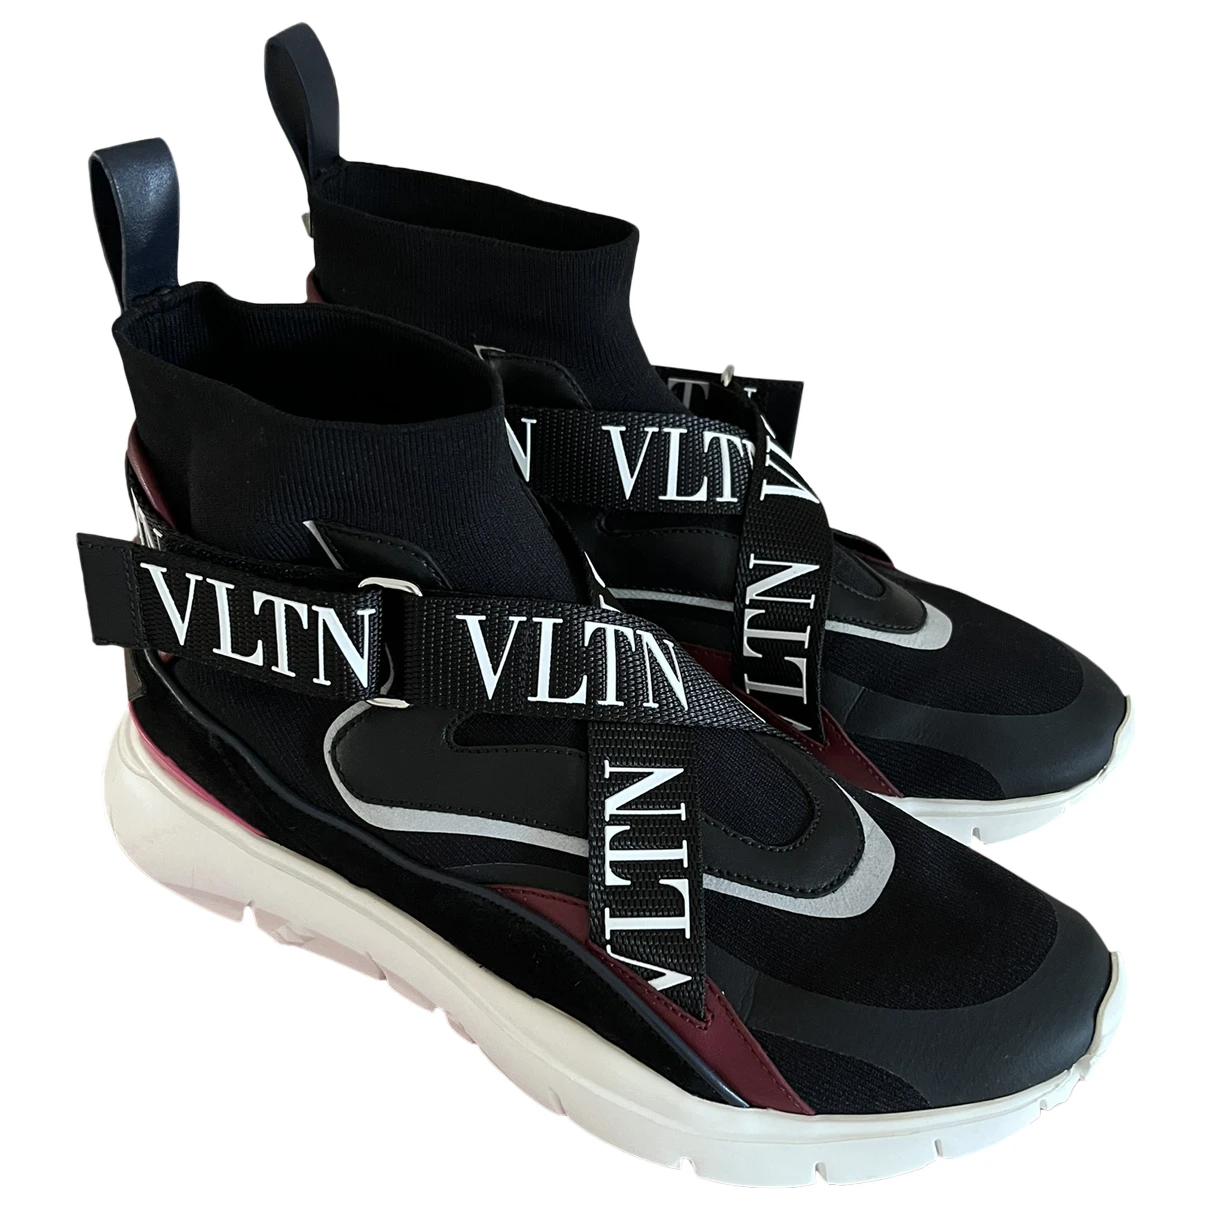 shoes Valentino Garavani trainers Sneakers chaussettes Vltn for Female Leather 5 UK. Used condition